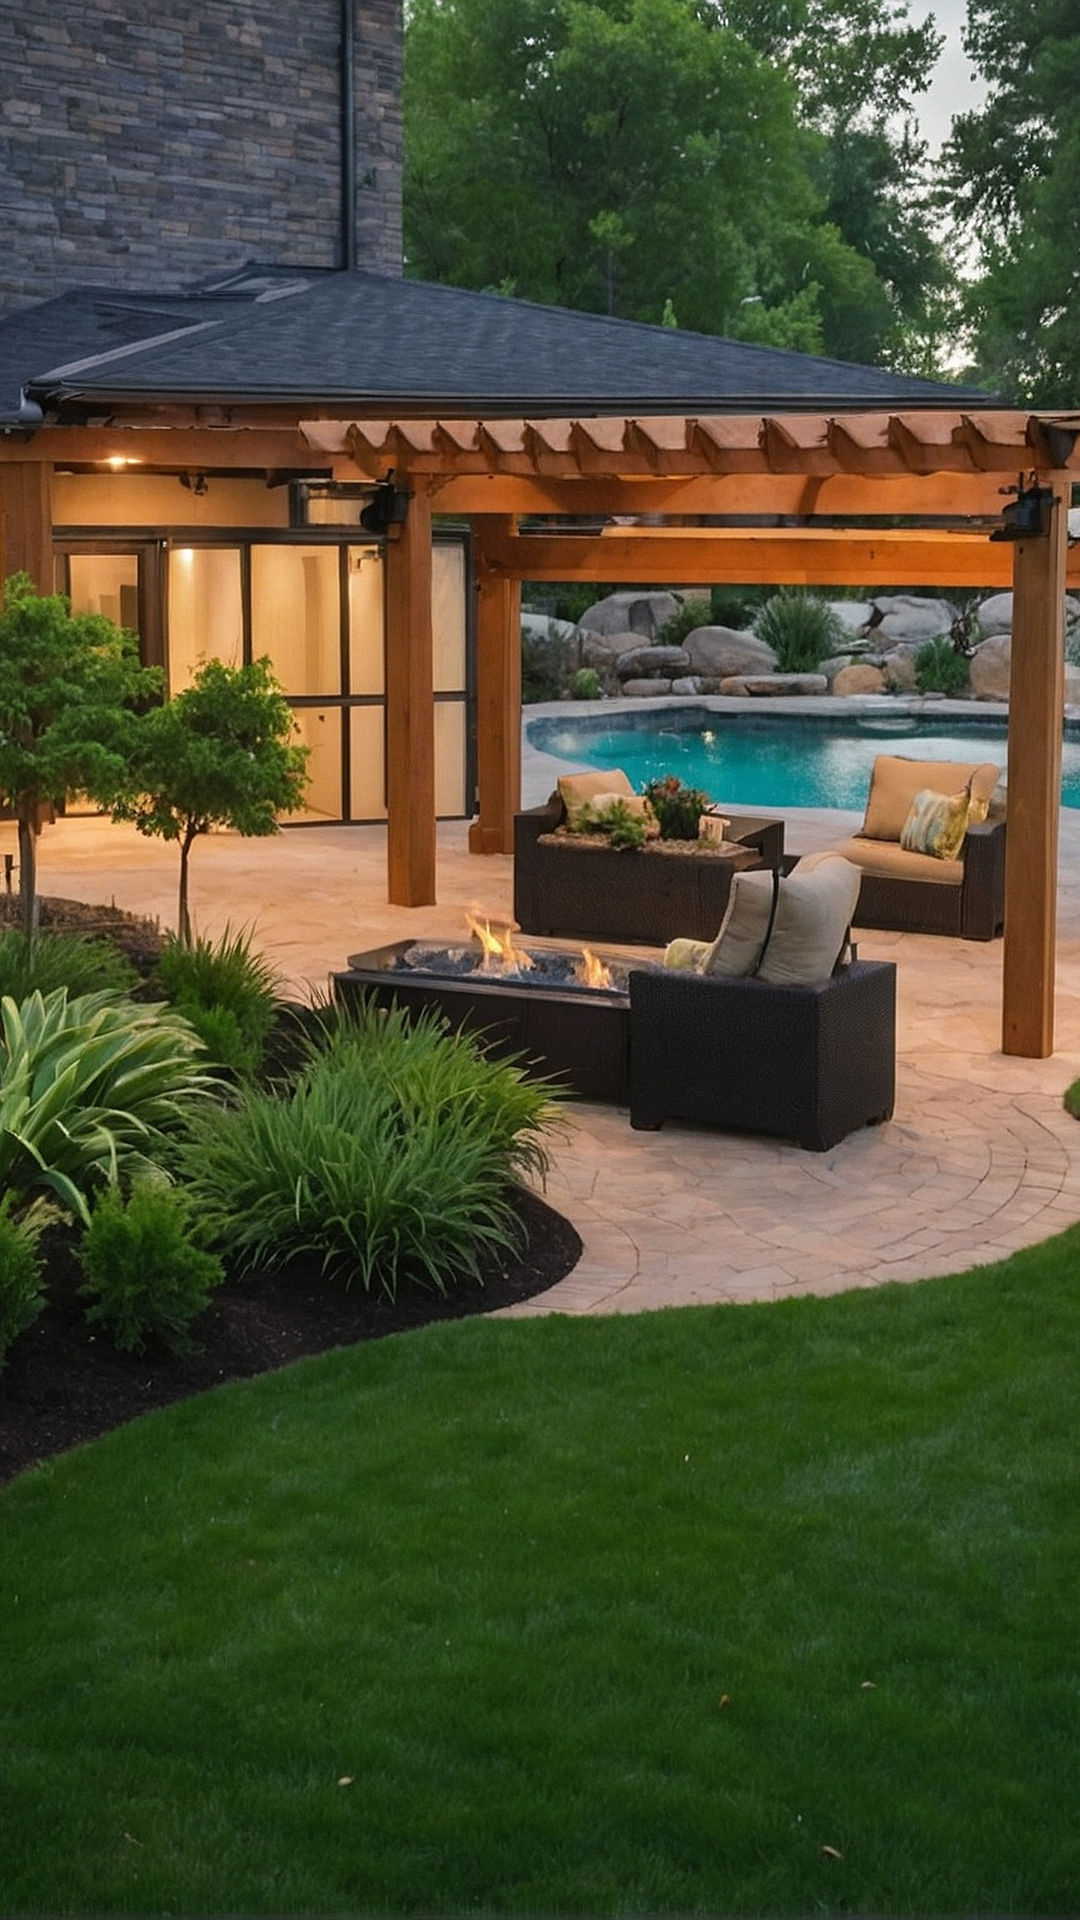 DIY Landscaping: Craft Your Own Backyard Escape